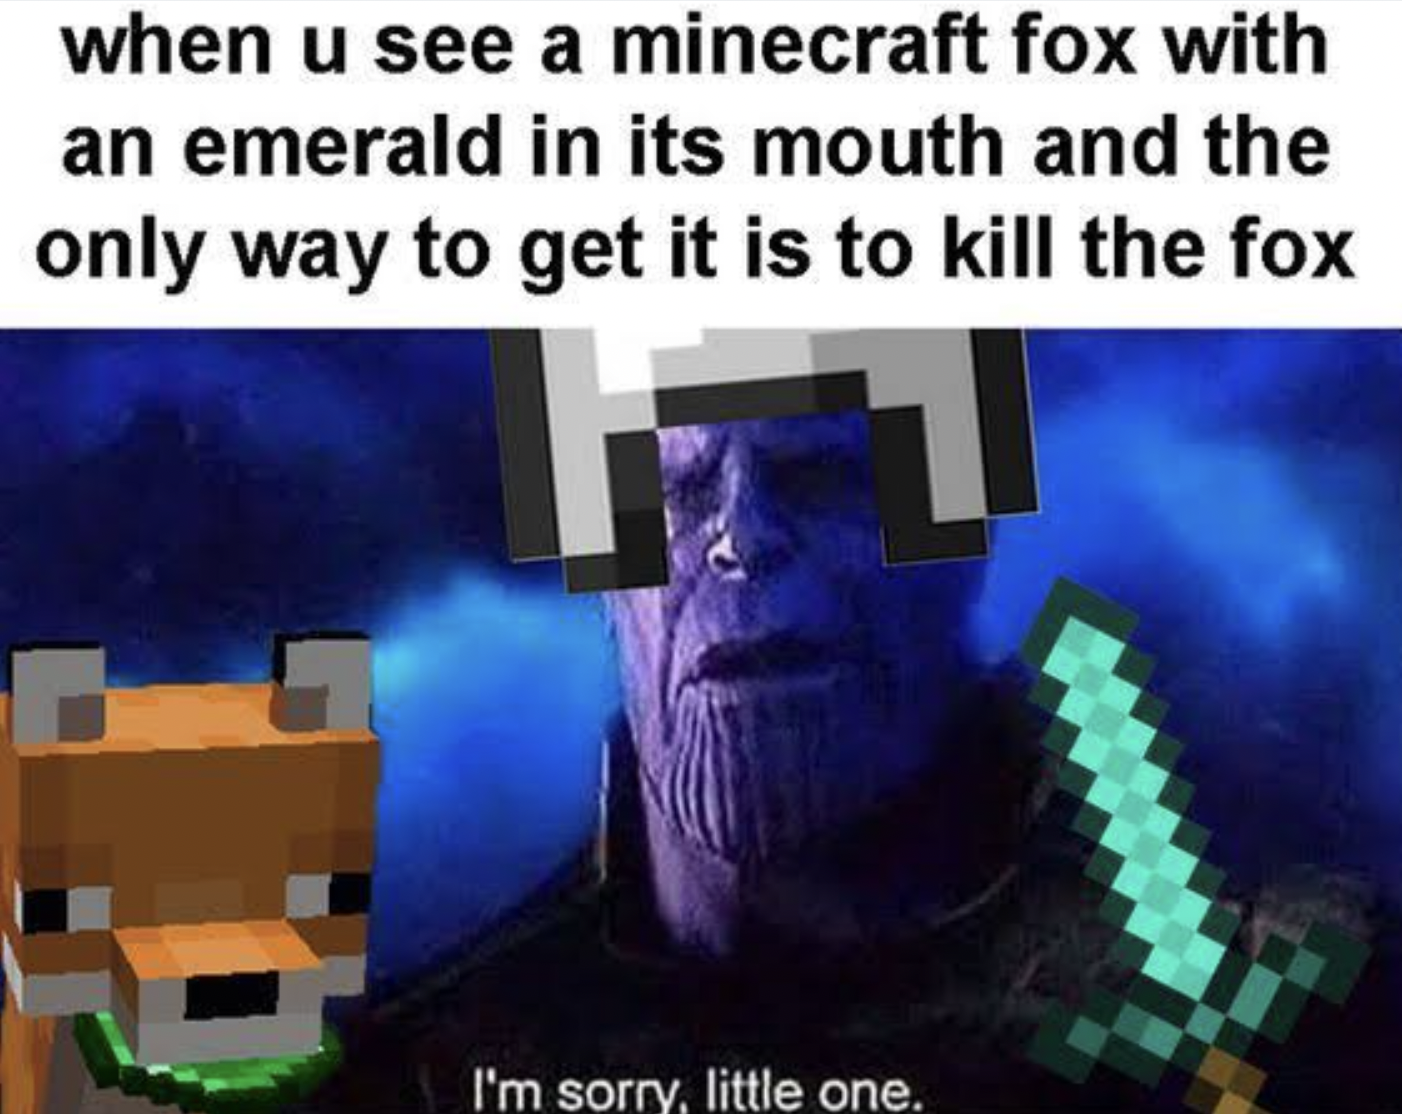 Minecraft Memes - cartoon - when u see a minecraft fox with an emerald in its mouth and the only way to get it is to kill the fox 0 I'm sorry, little one.